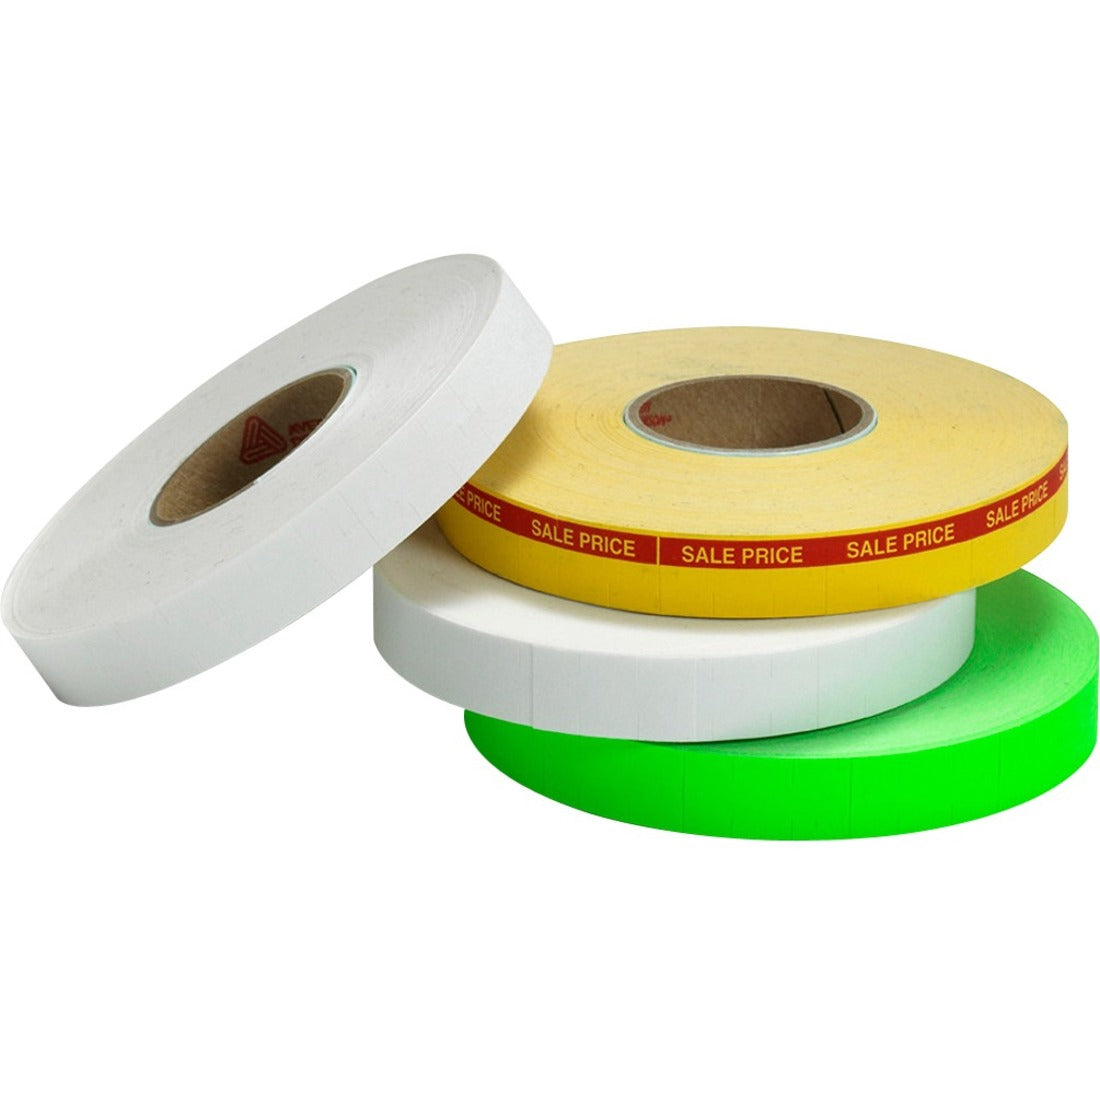 monarch-1105-1110-fastening-gun-labels-permanent-adhesive-white-paper-1063-roll-17008-total-labels-17008-pack_mnk000542 - 1